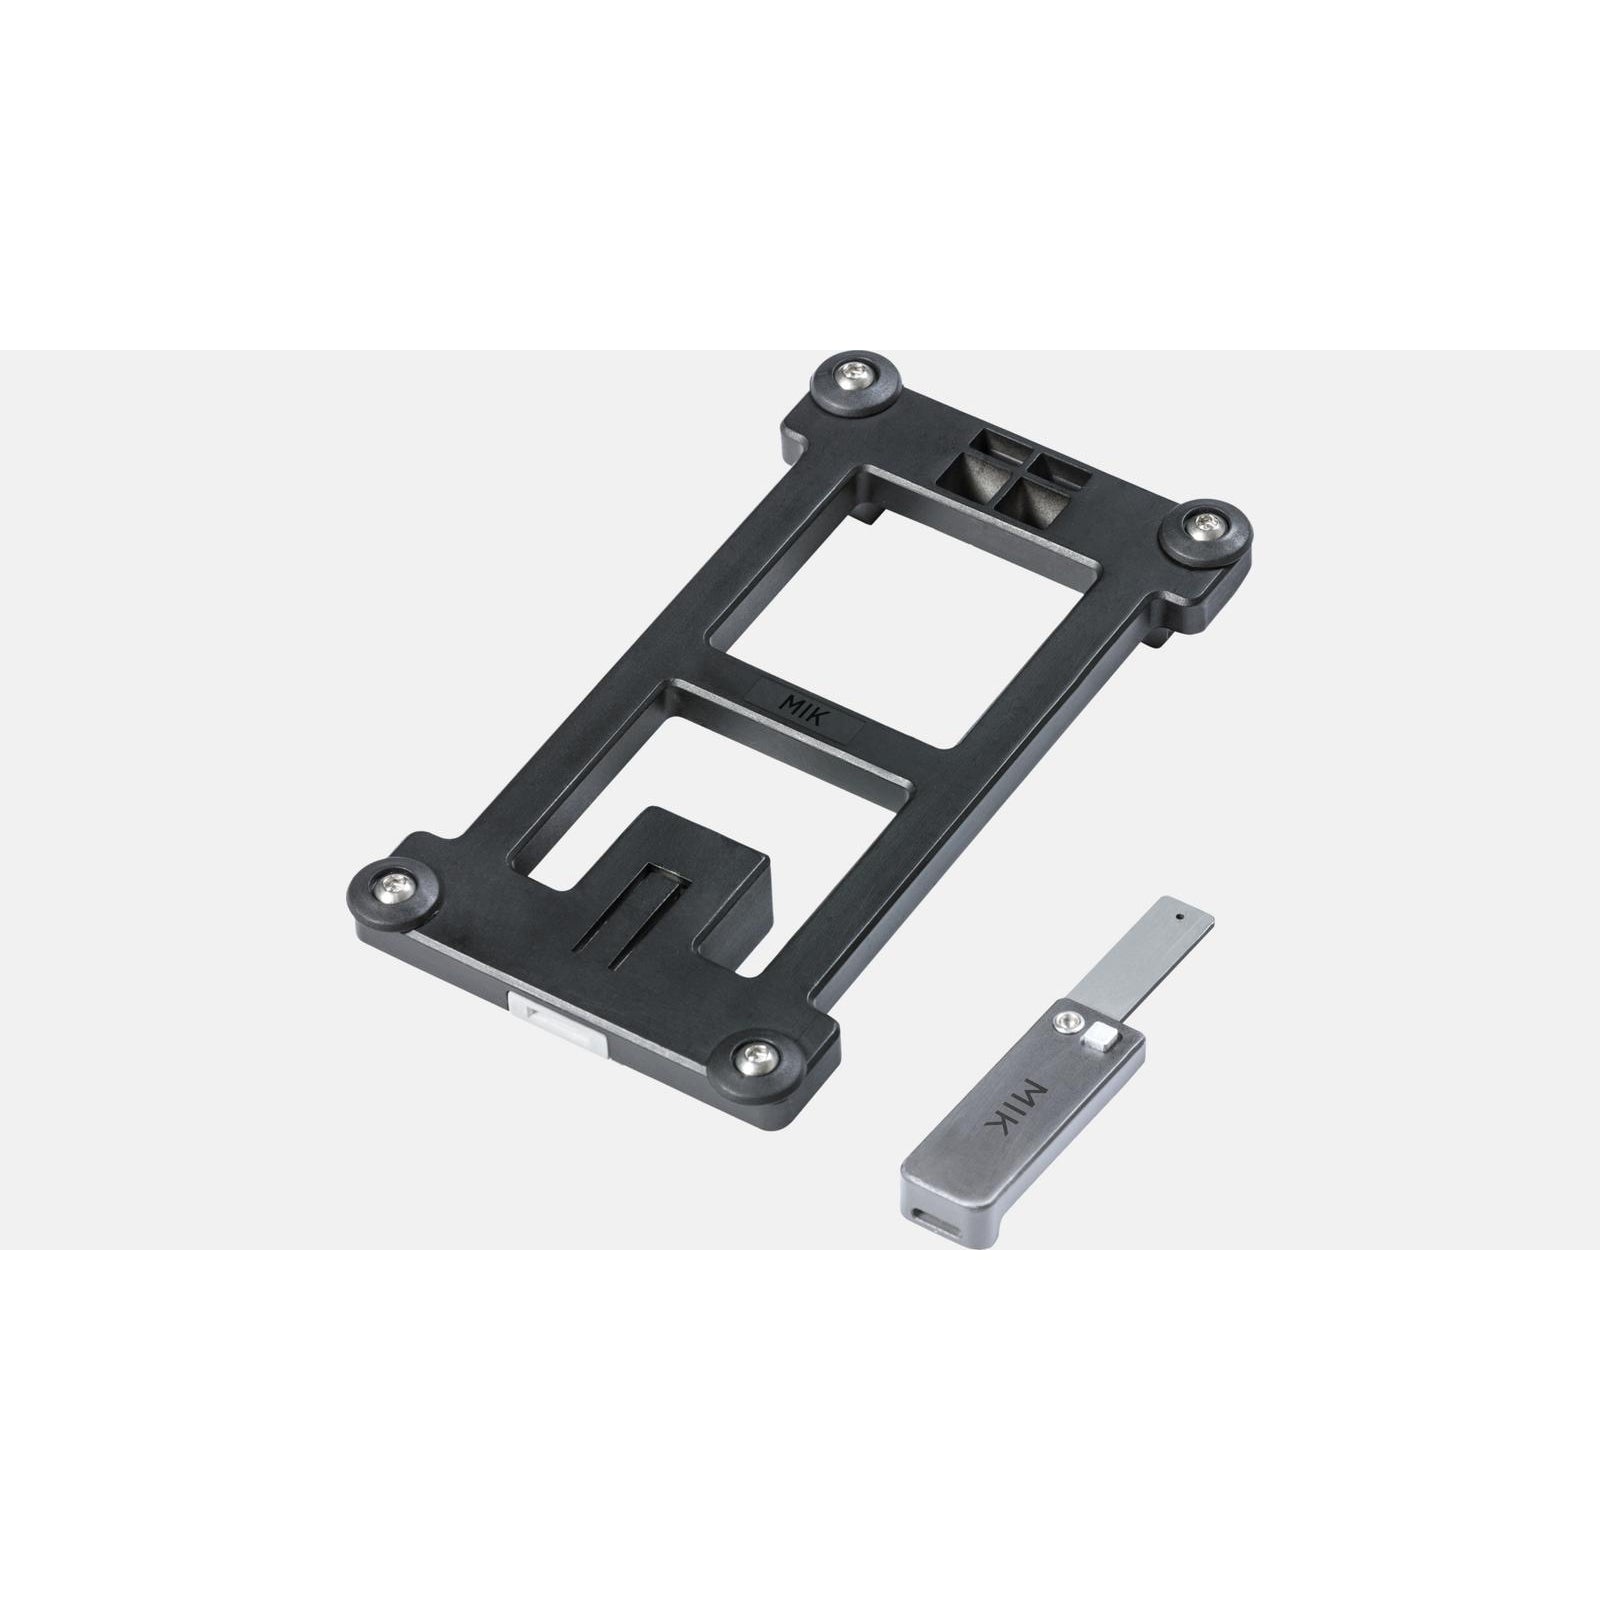 Specialized MIK Adapter Plate - Accessories - Bicycle Warehouse